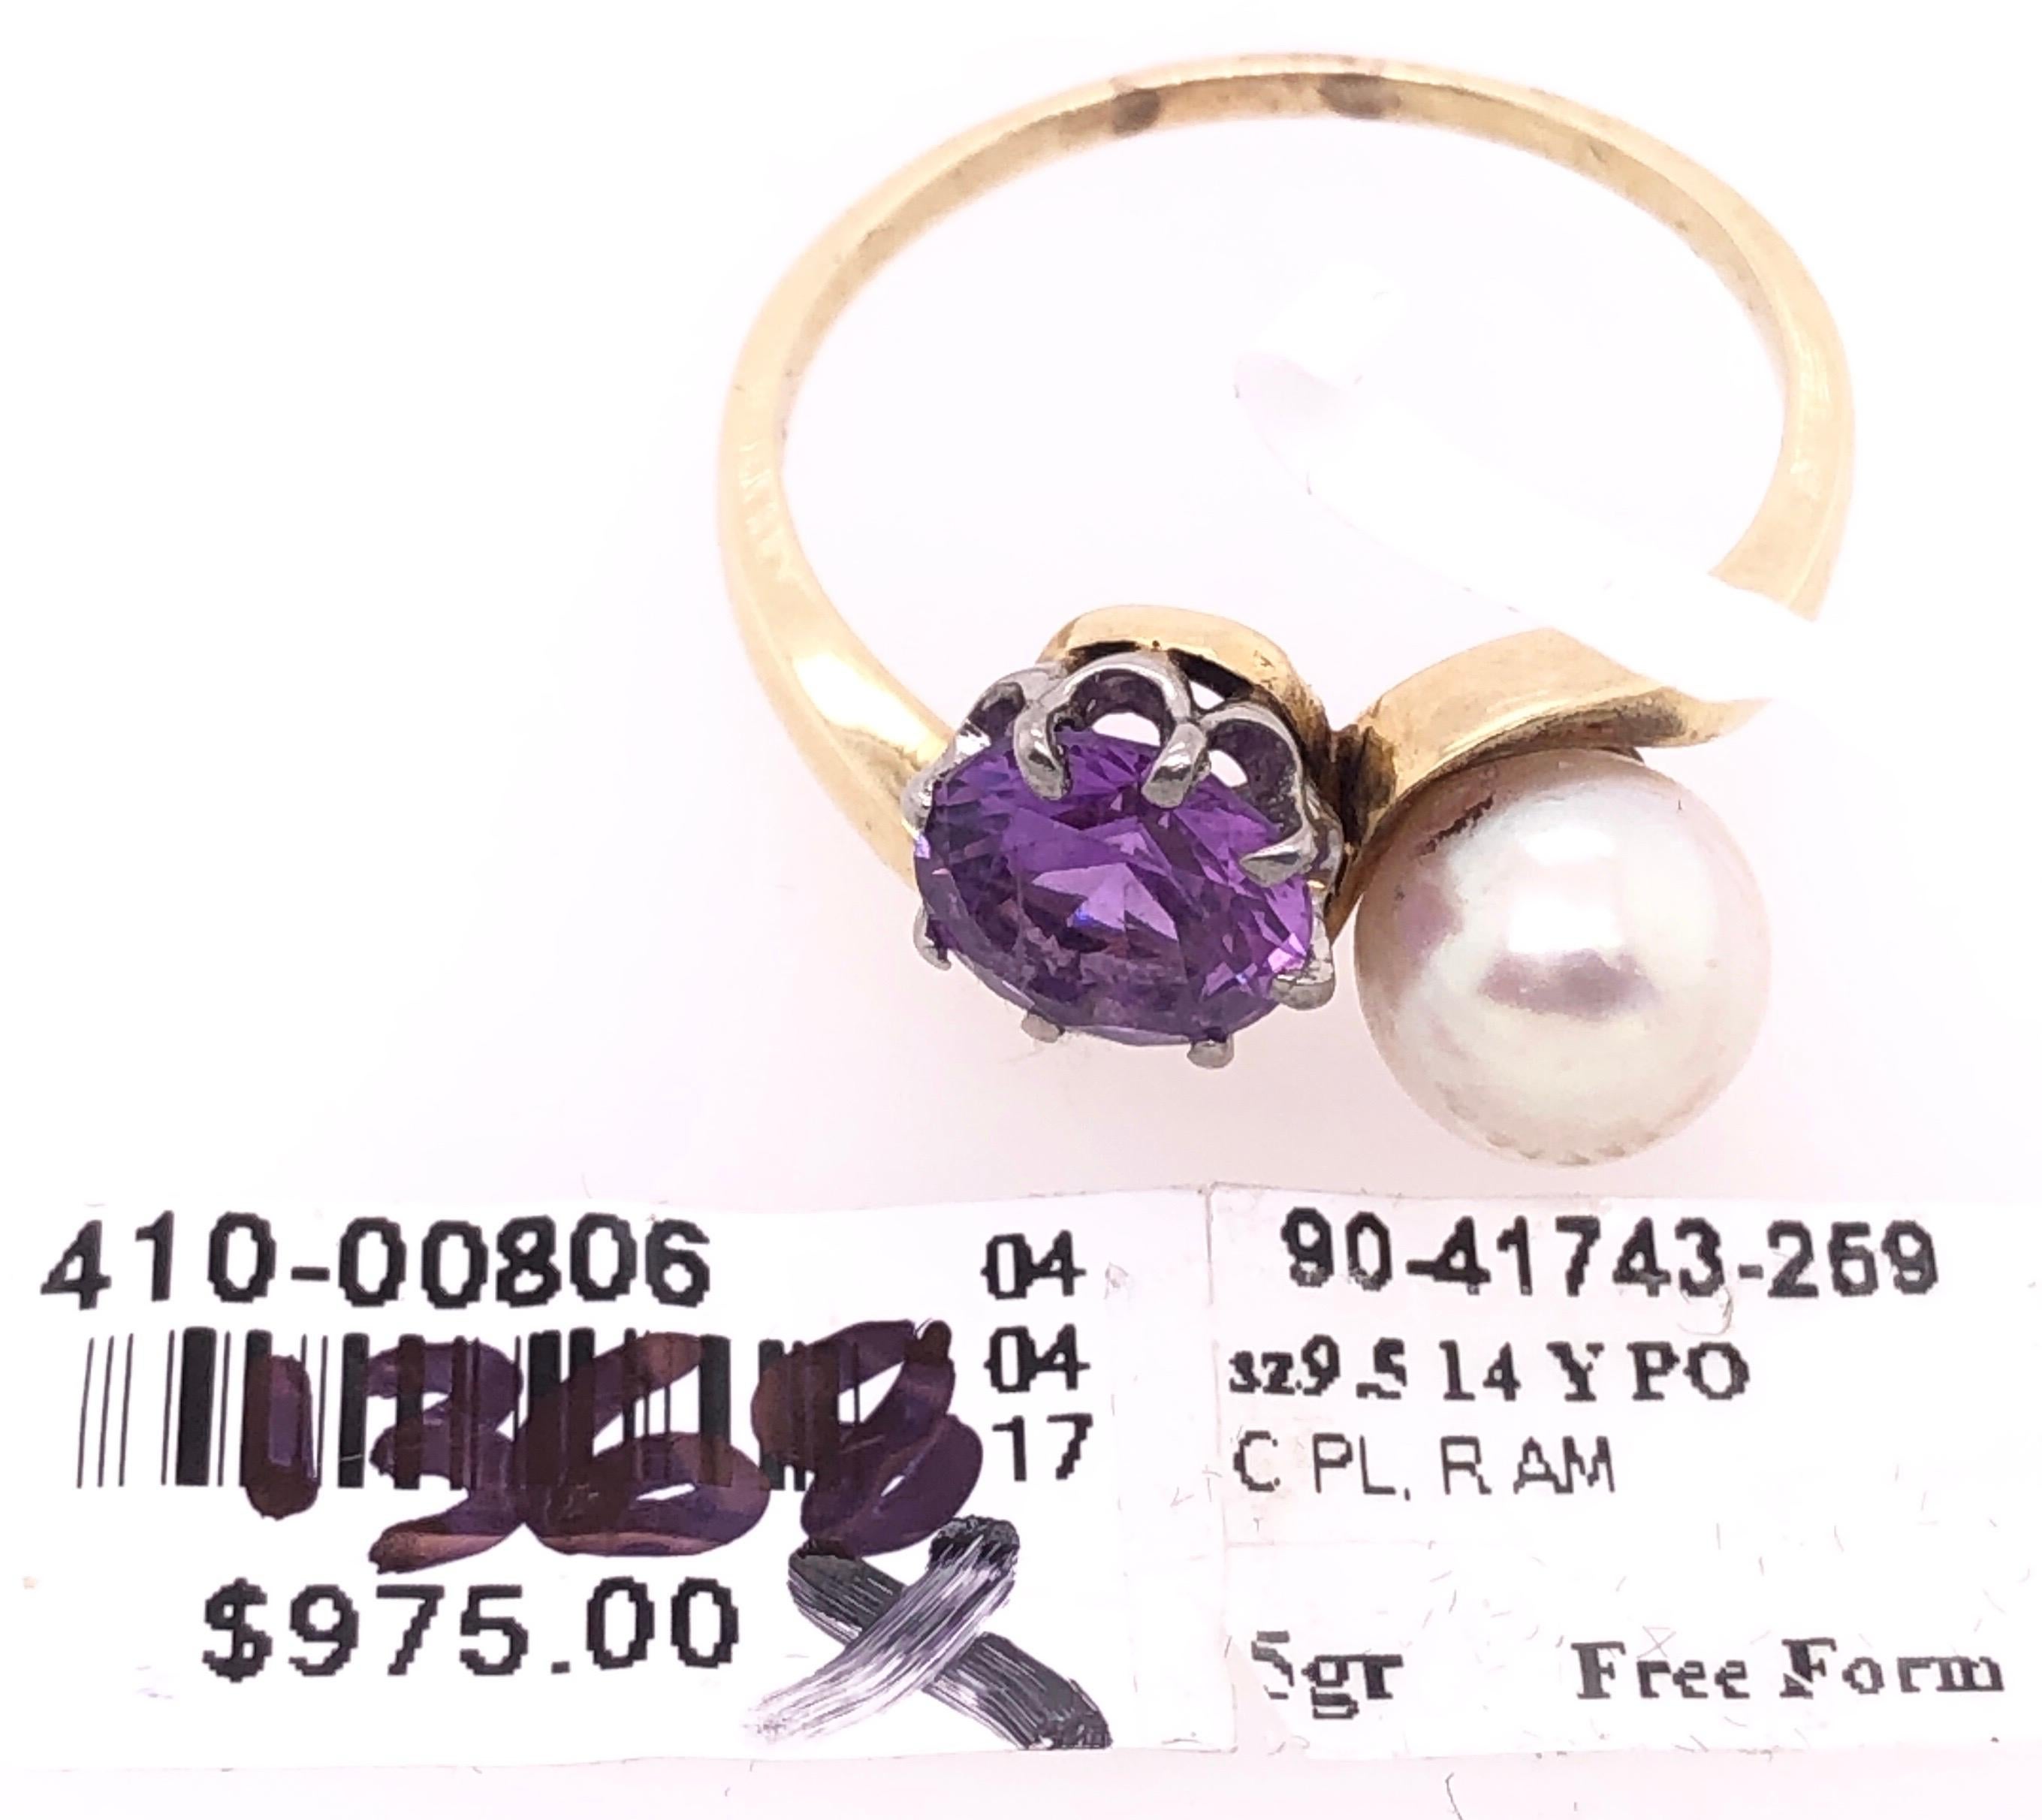 14 Karat Yellow Gold Freeform Ring with Solitaire Amethyst and Pearl For Sale 1